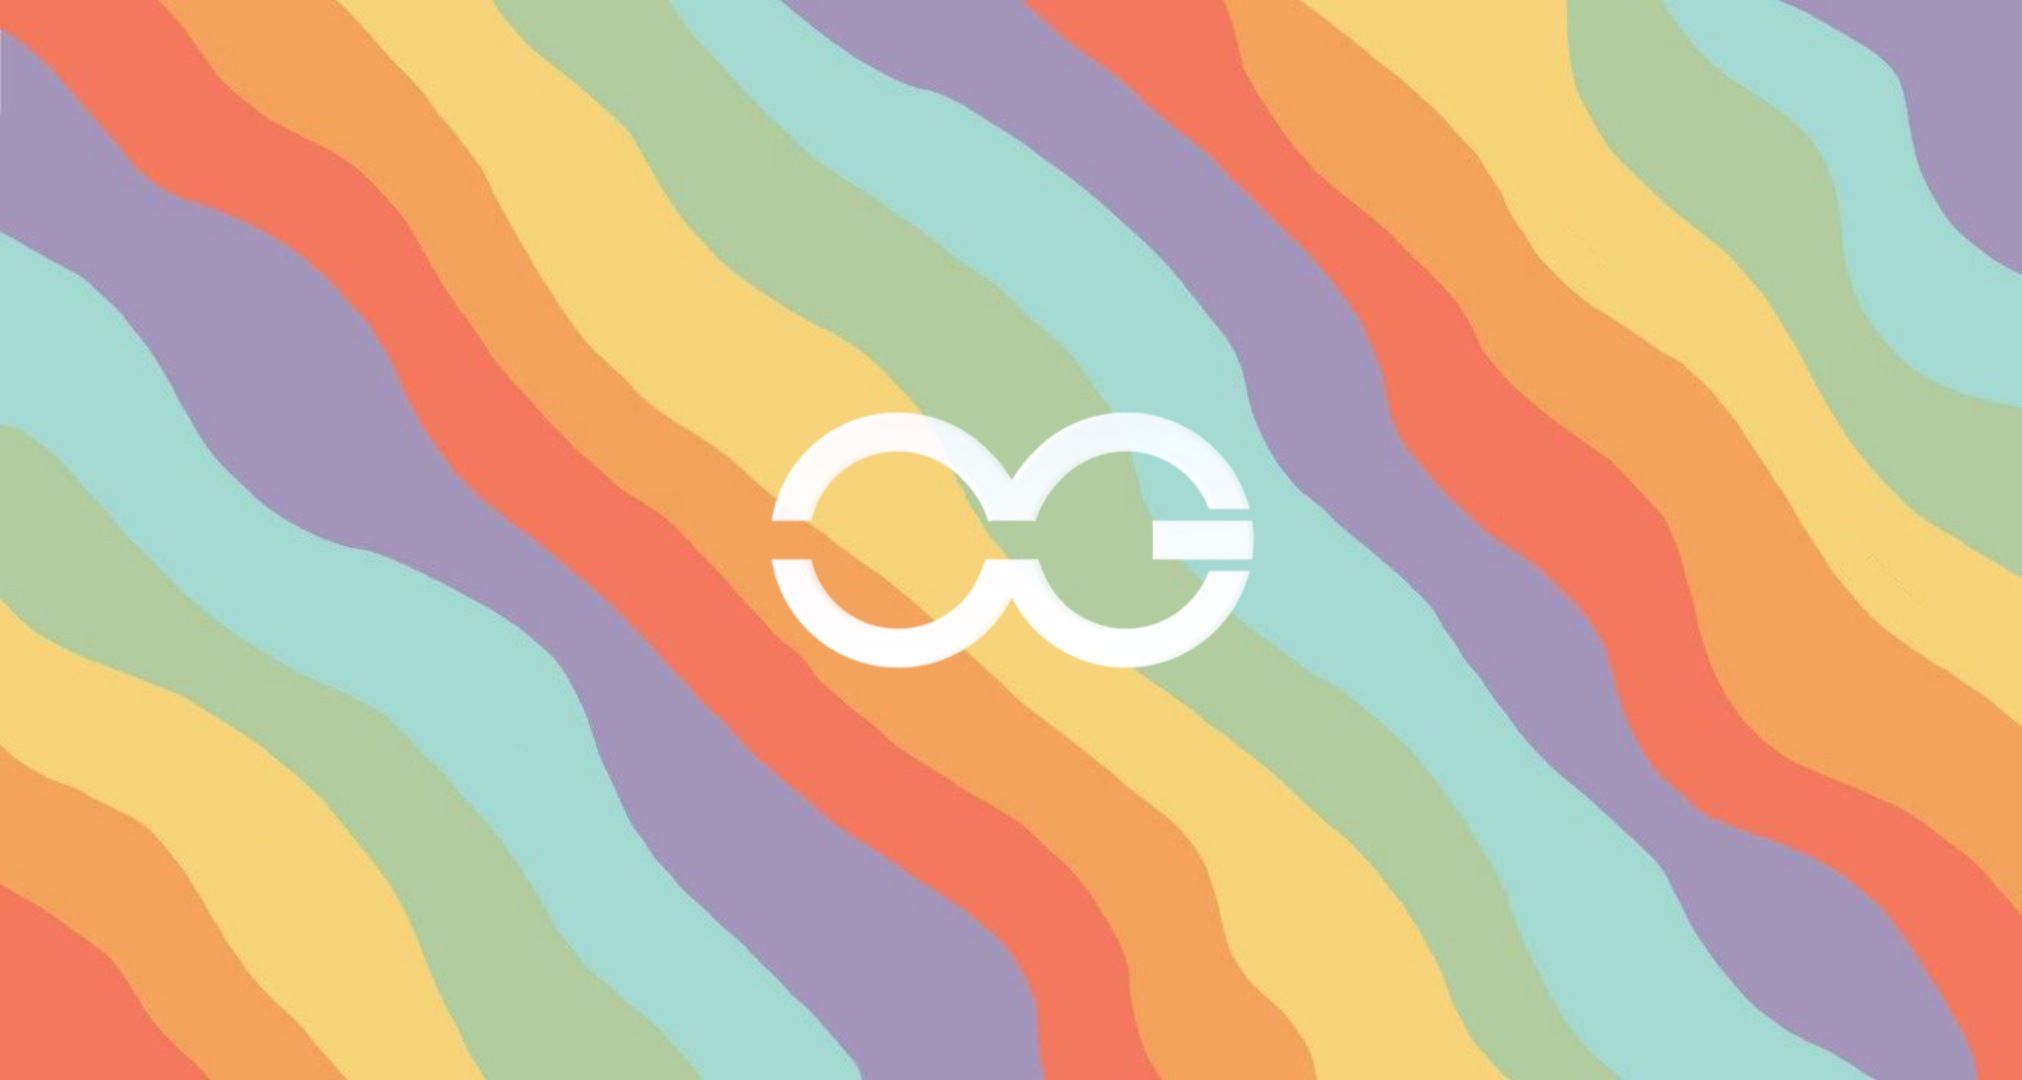 A colorful background with the letter g on it - Pride